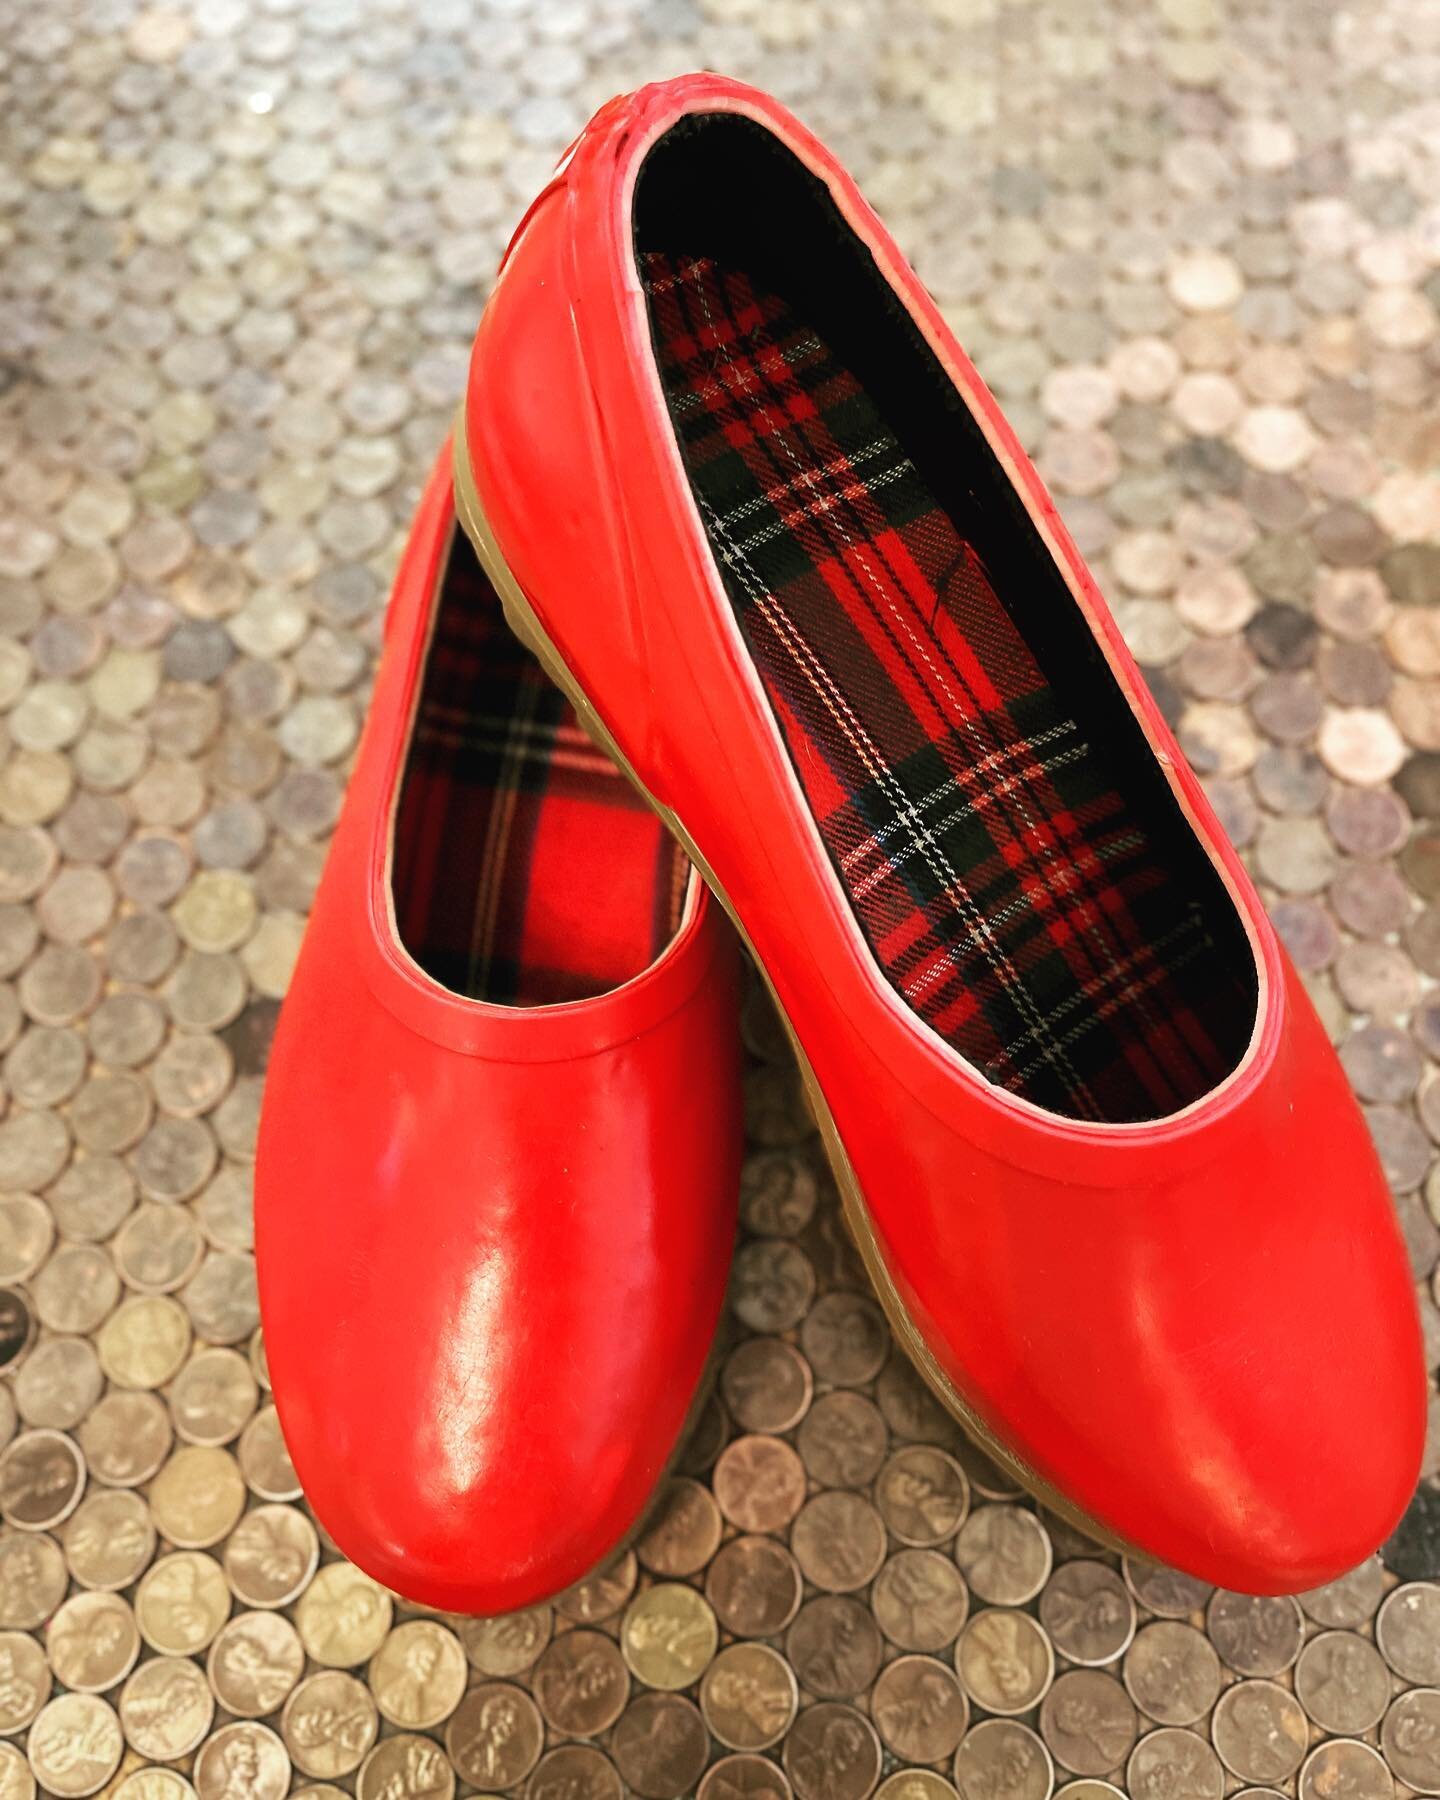 The time and place for red shoes? Always and anywhere.
.
.
.
.
.
.
.
#red #redshoes #plaid #brooksbrothers #vintage #secondhand #thrifted #shopsmall #shoplocalconnecticut  #secondhandfirst #secondhandfashion #bestofct #newmilfordct #downtownnewmilfor